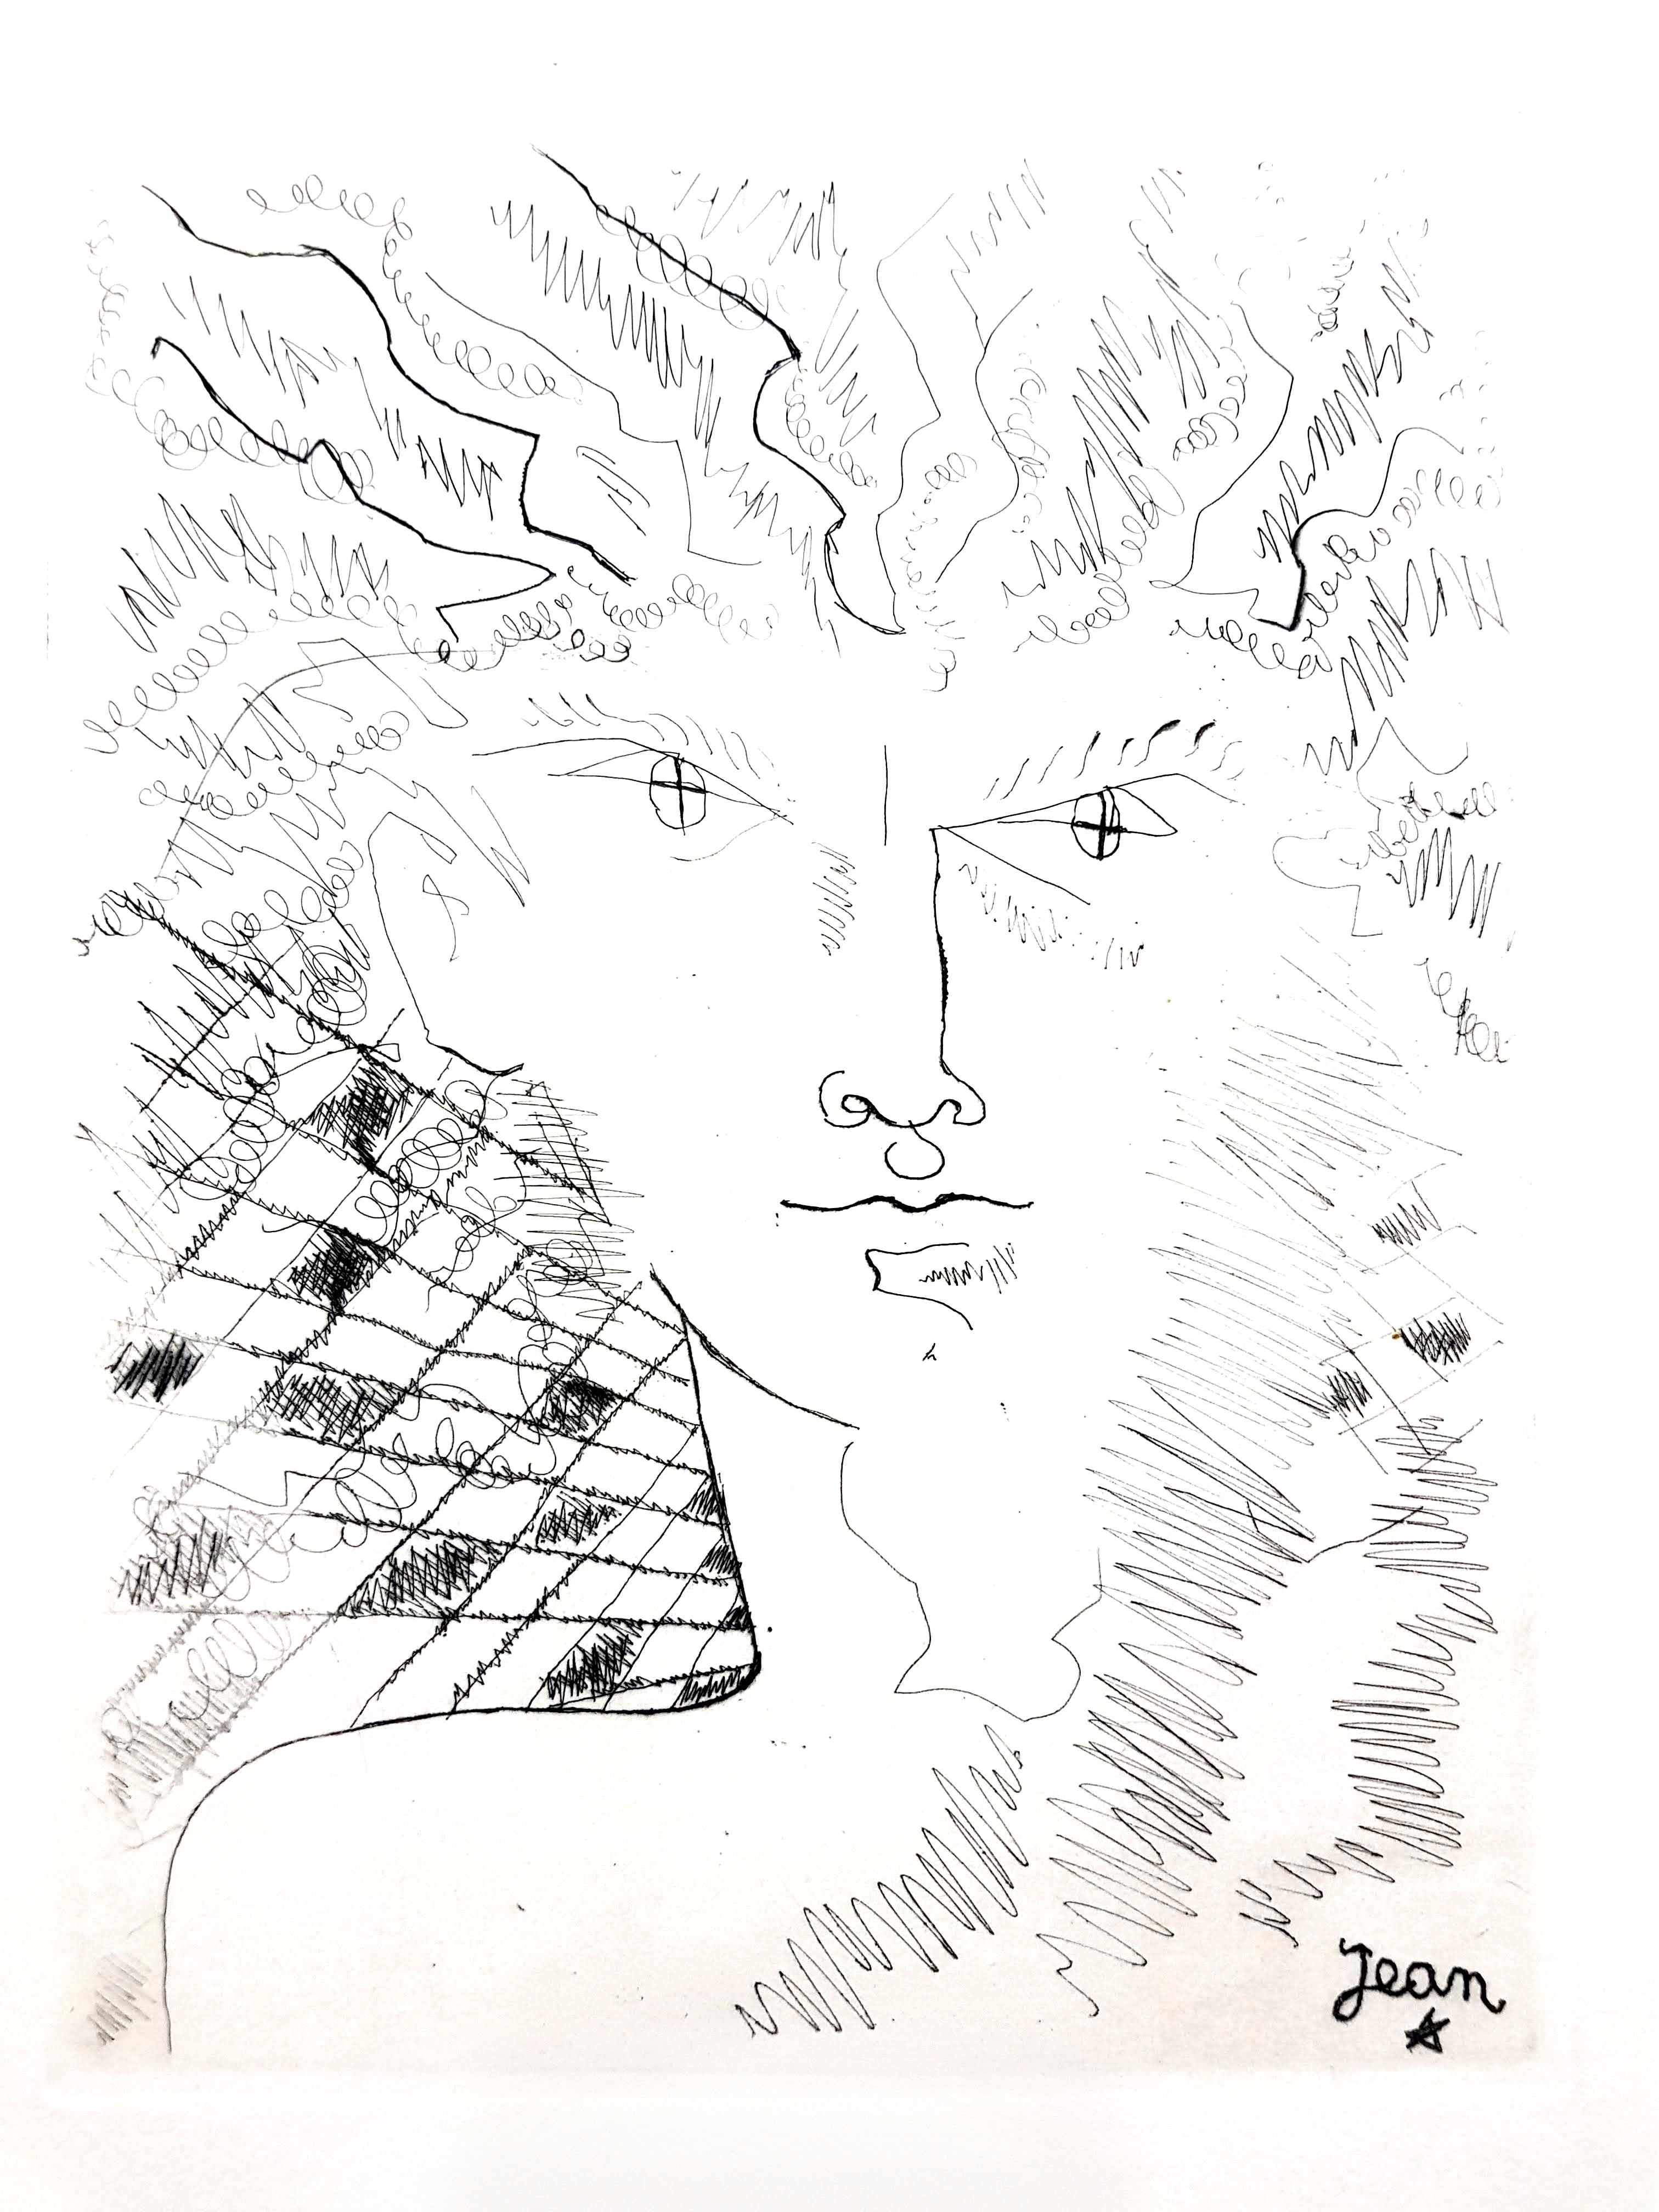 Jean Cocteau - Portrait - Original Etching
Paris, Le Gerbier, 1946
Edition of 340
Signed in the plate
Unnumbered as issued